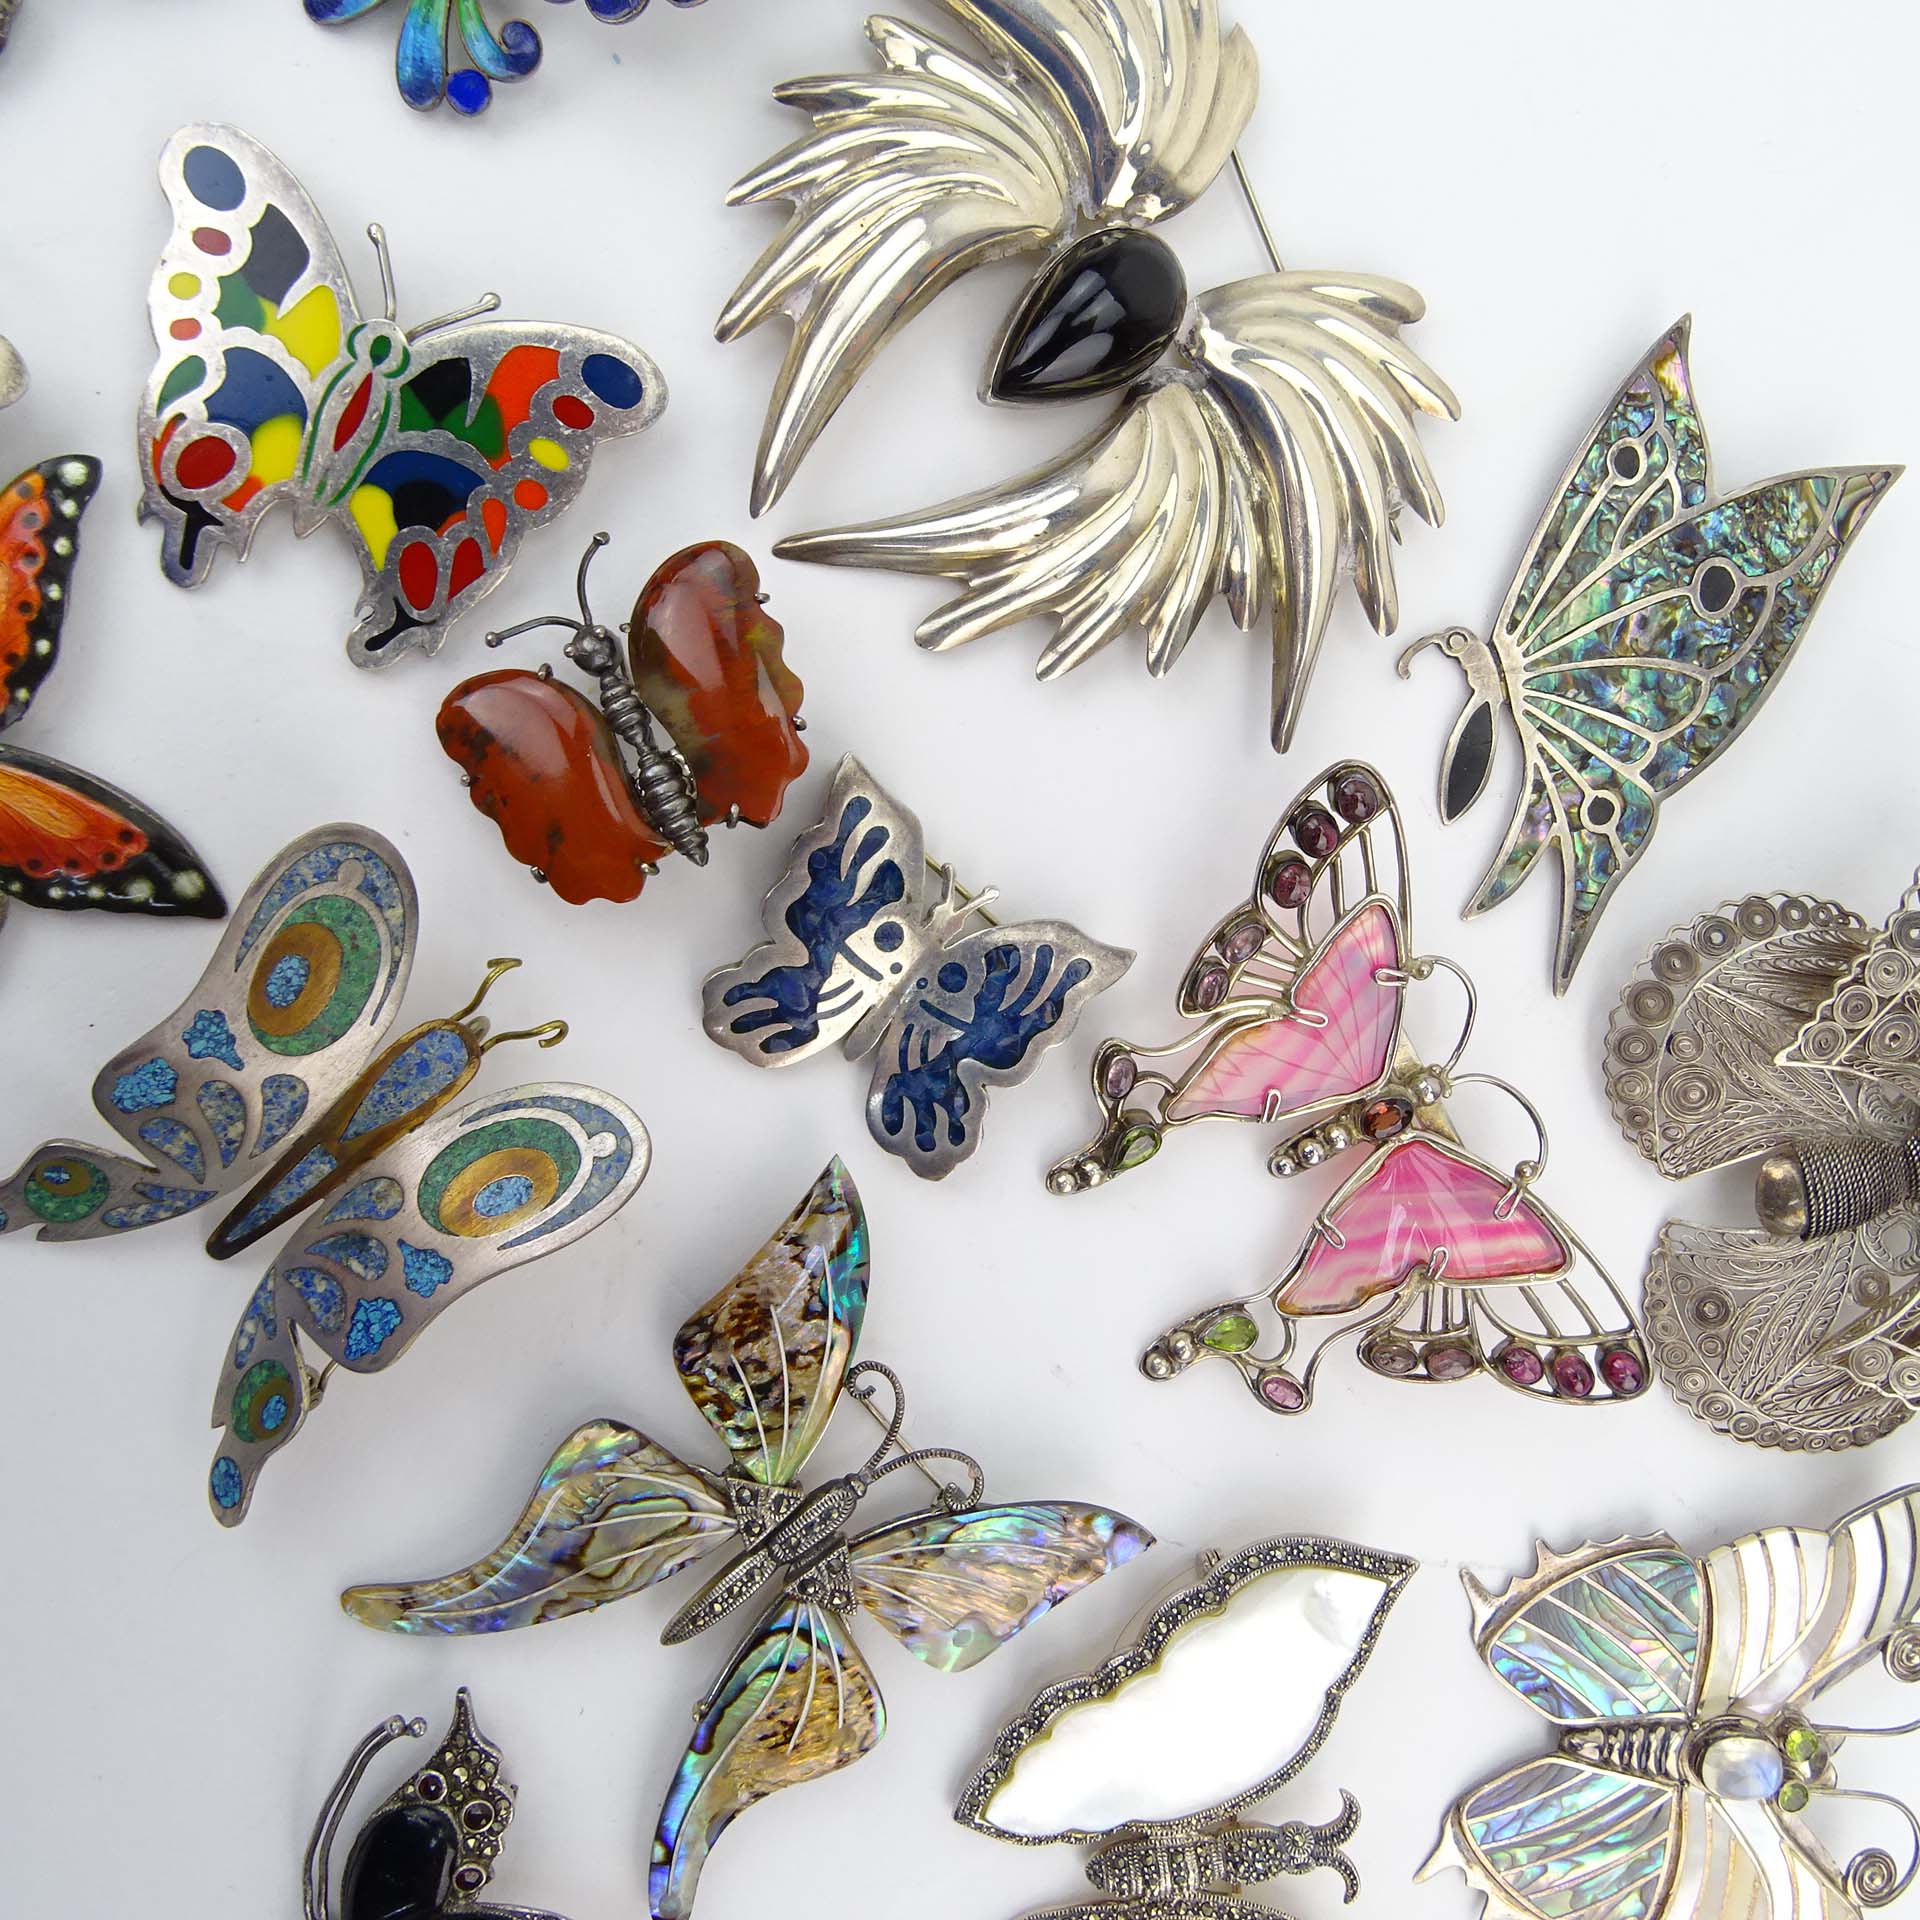 Collection of Seventeen (17) Silver Butterfly Brooches.